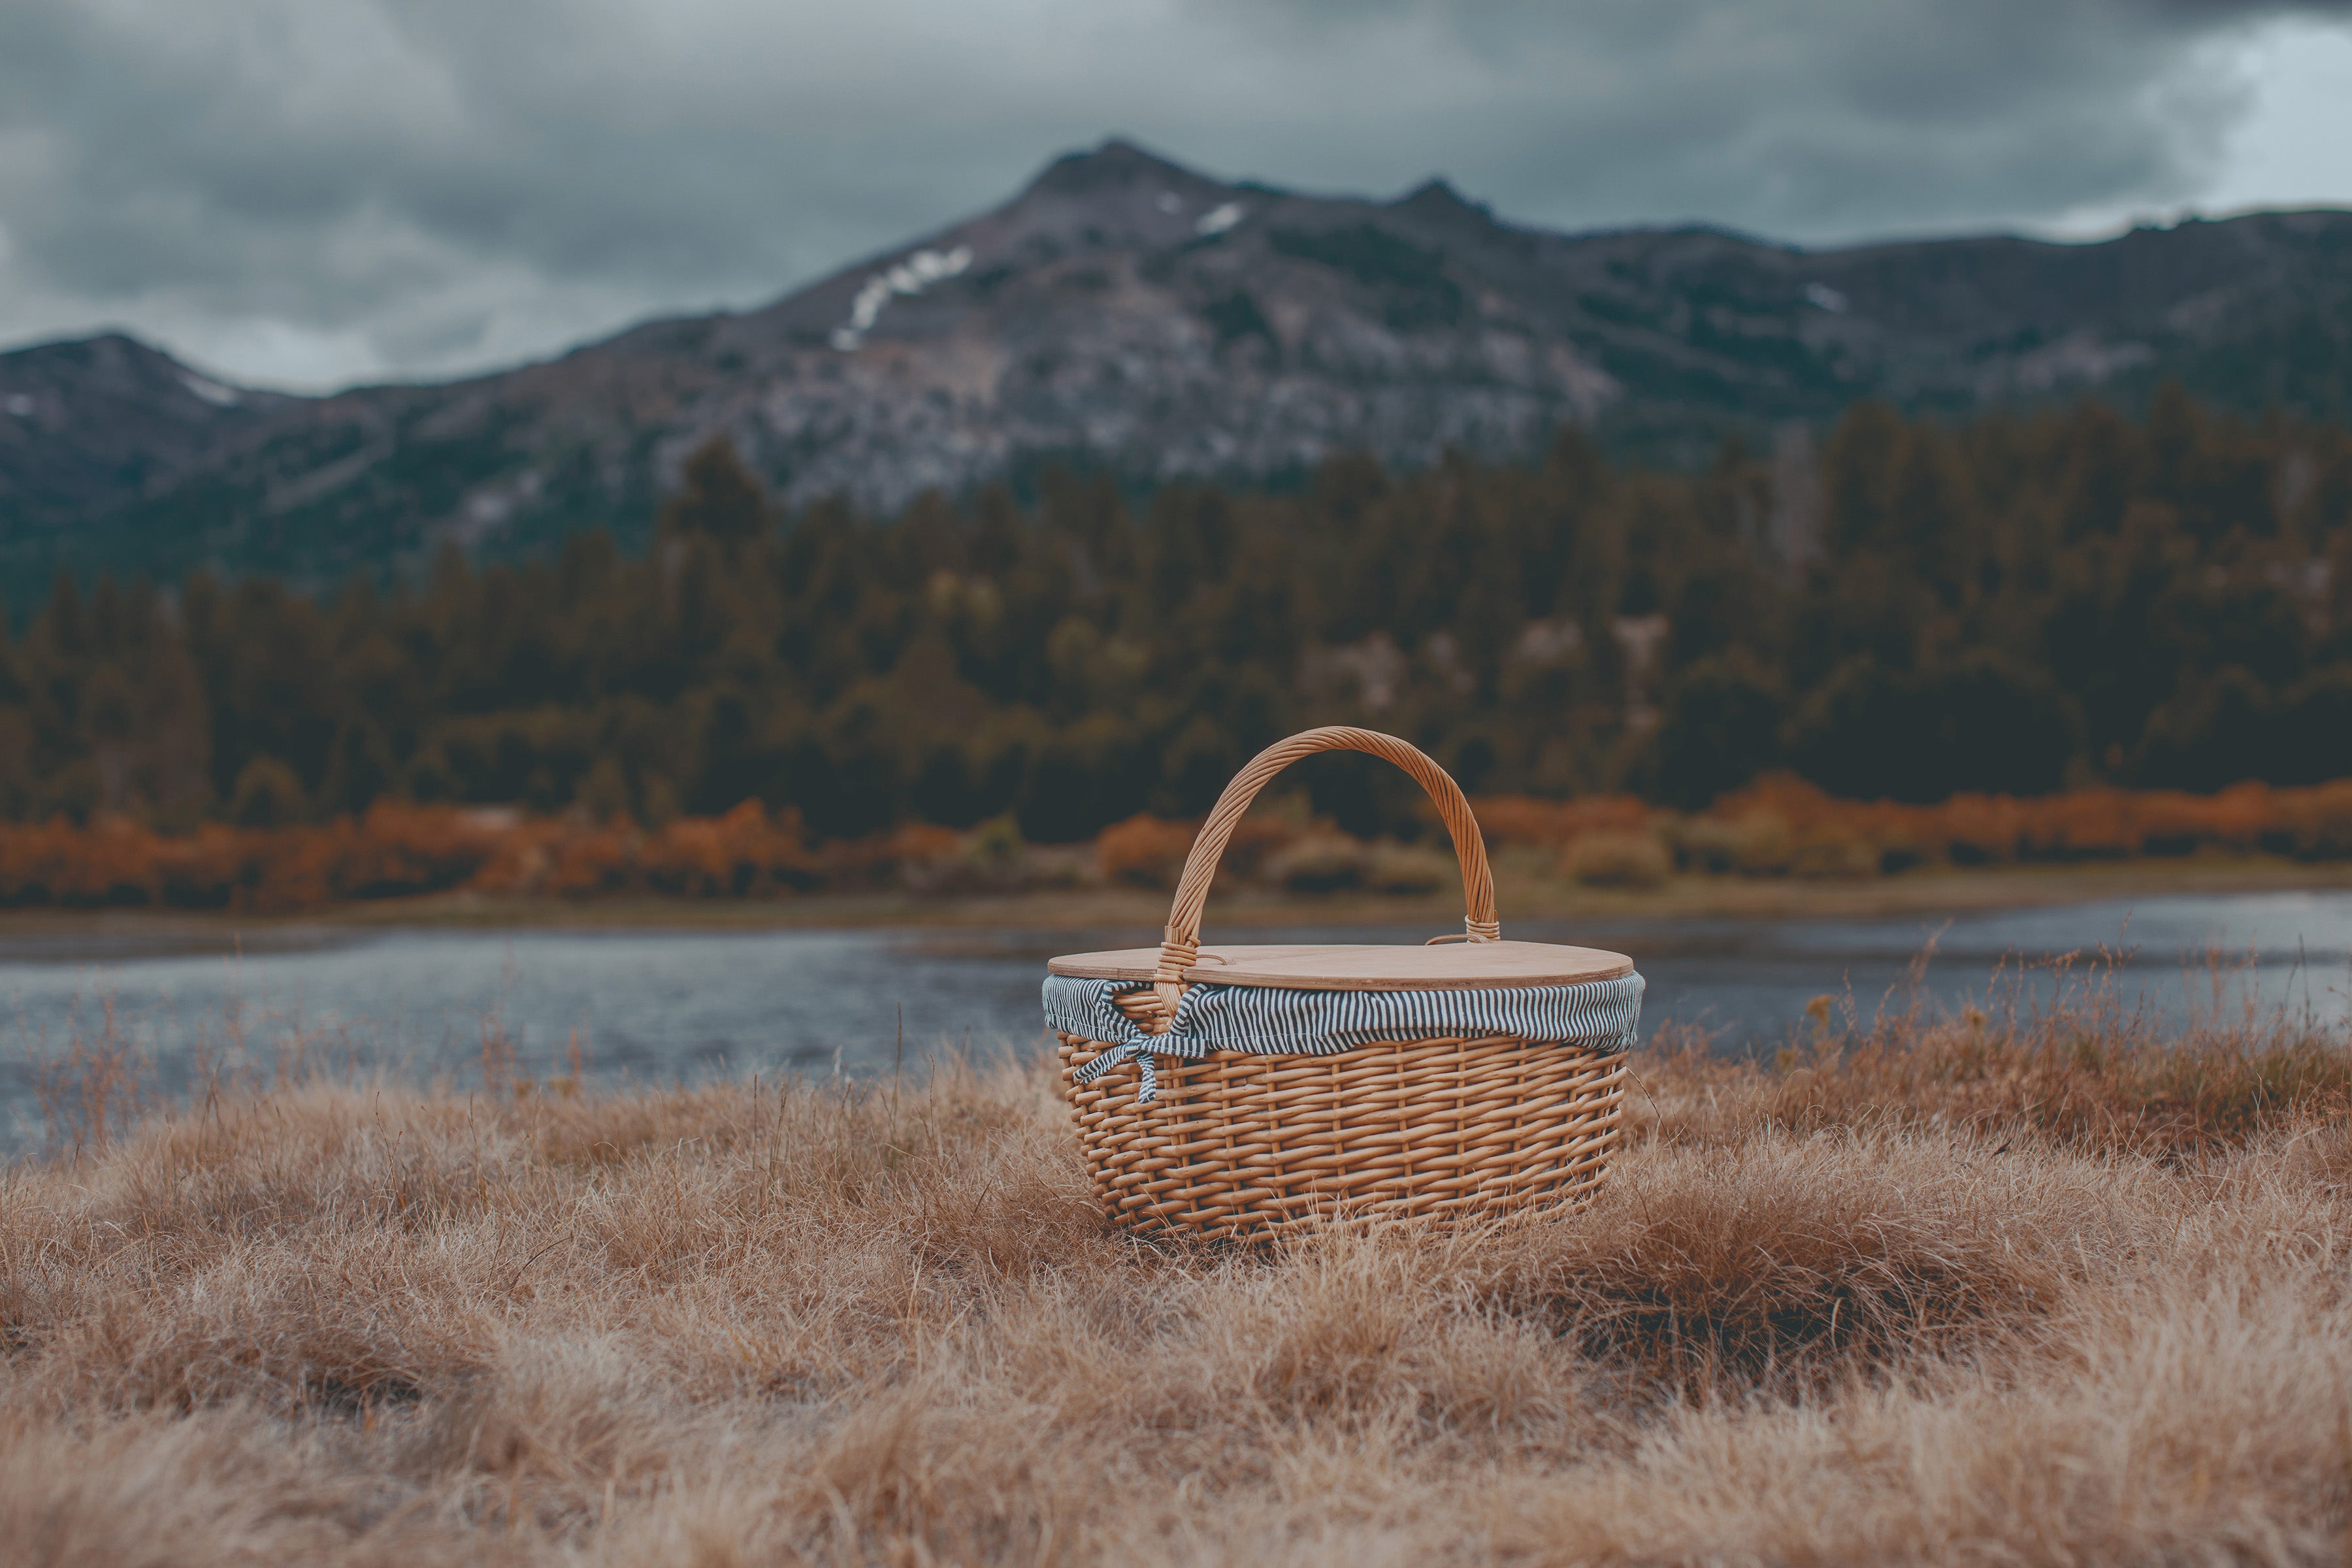 Country Picnic Basket